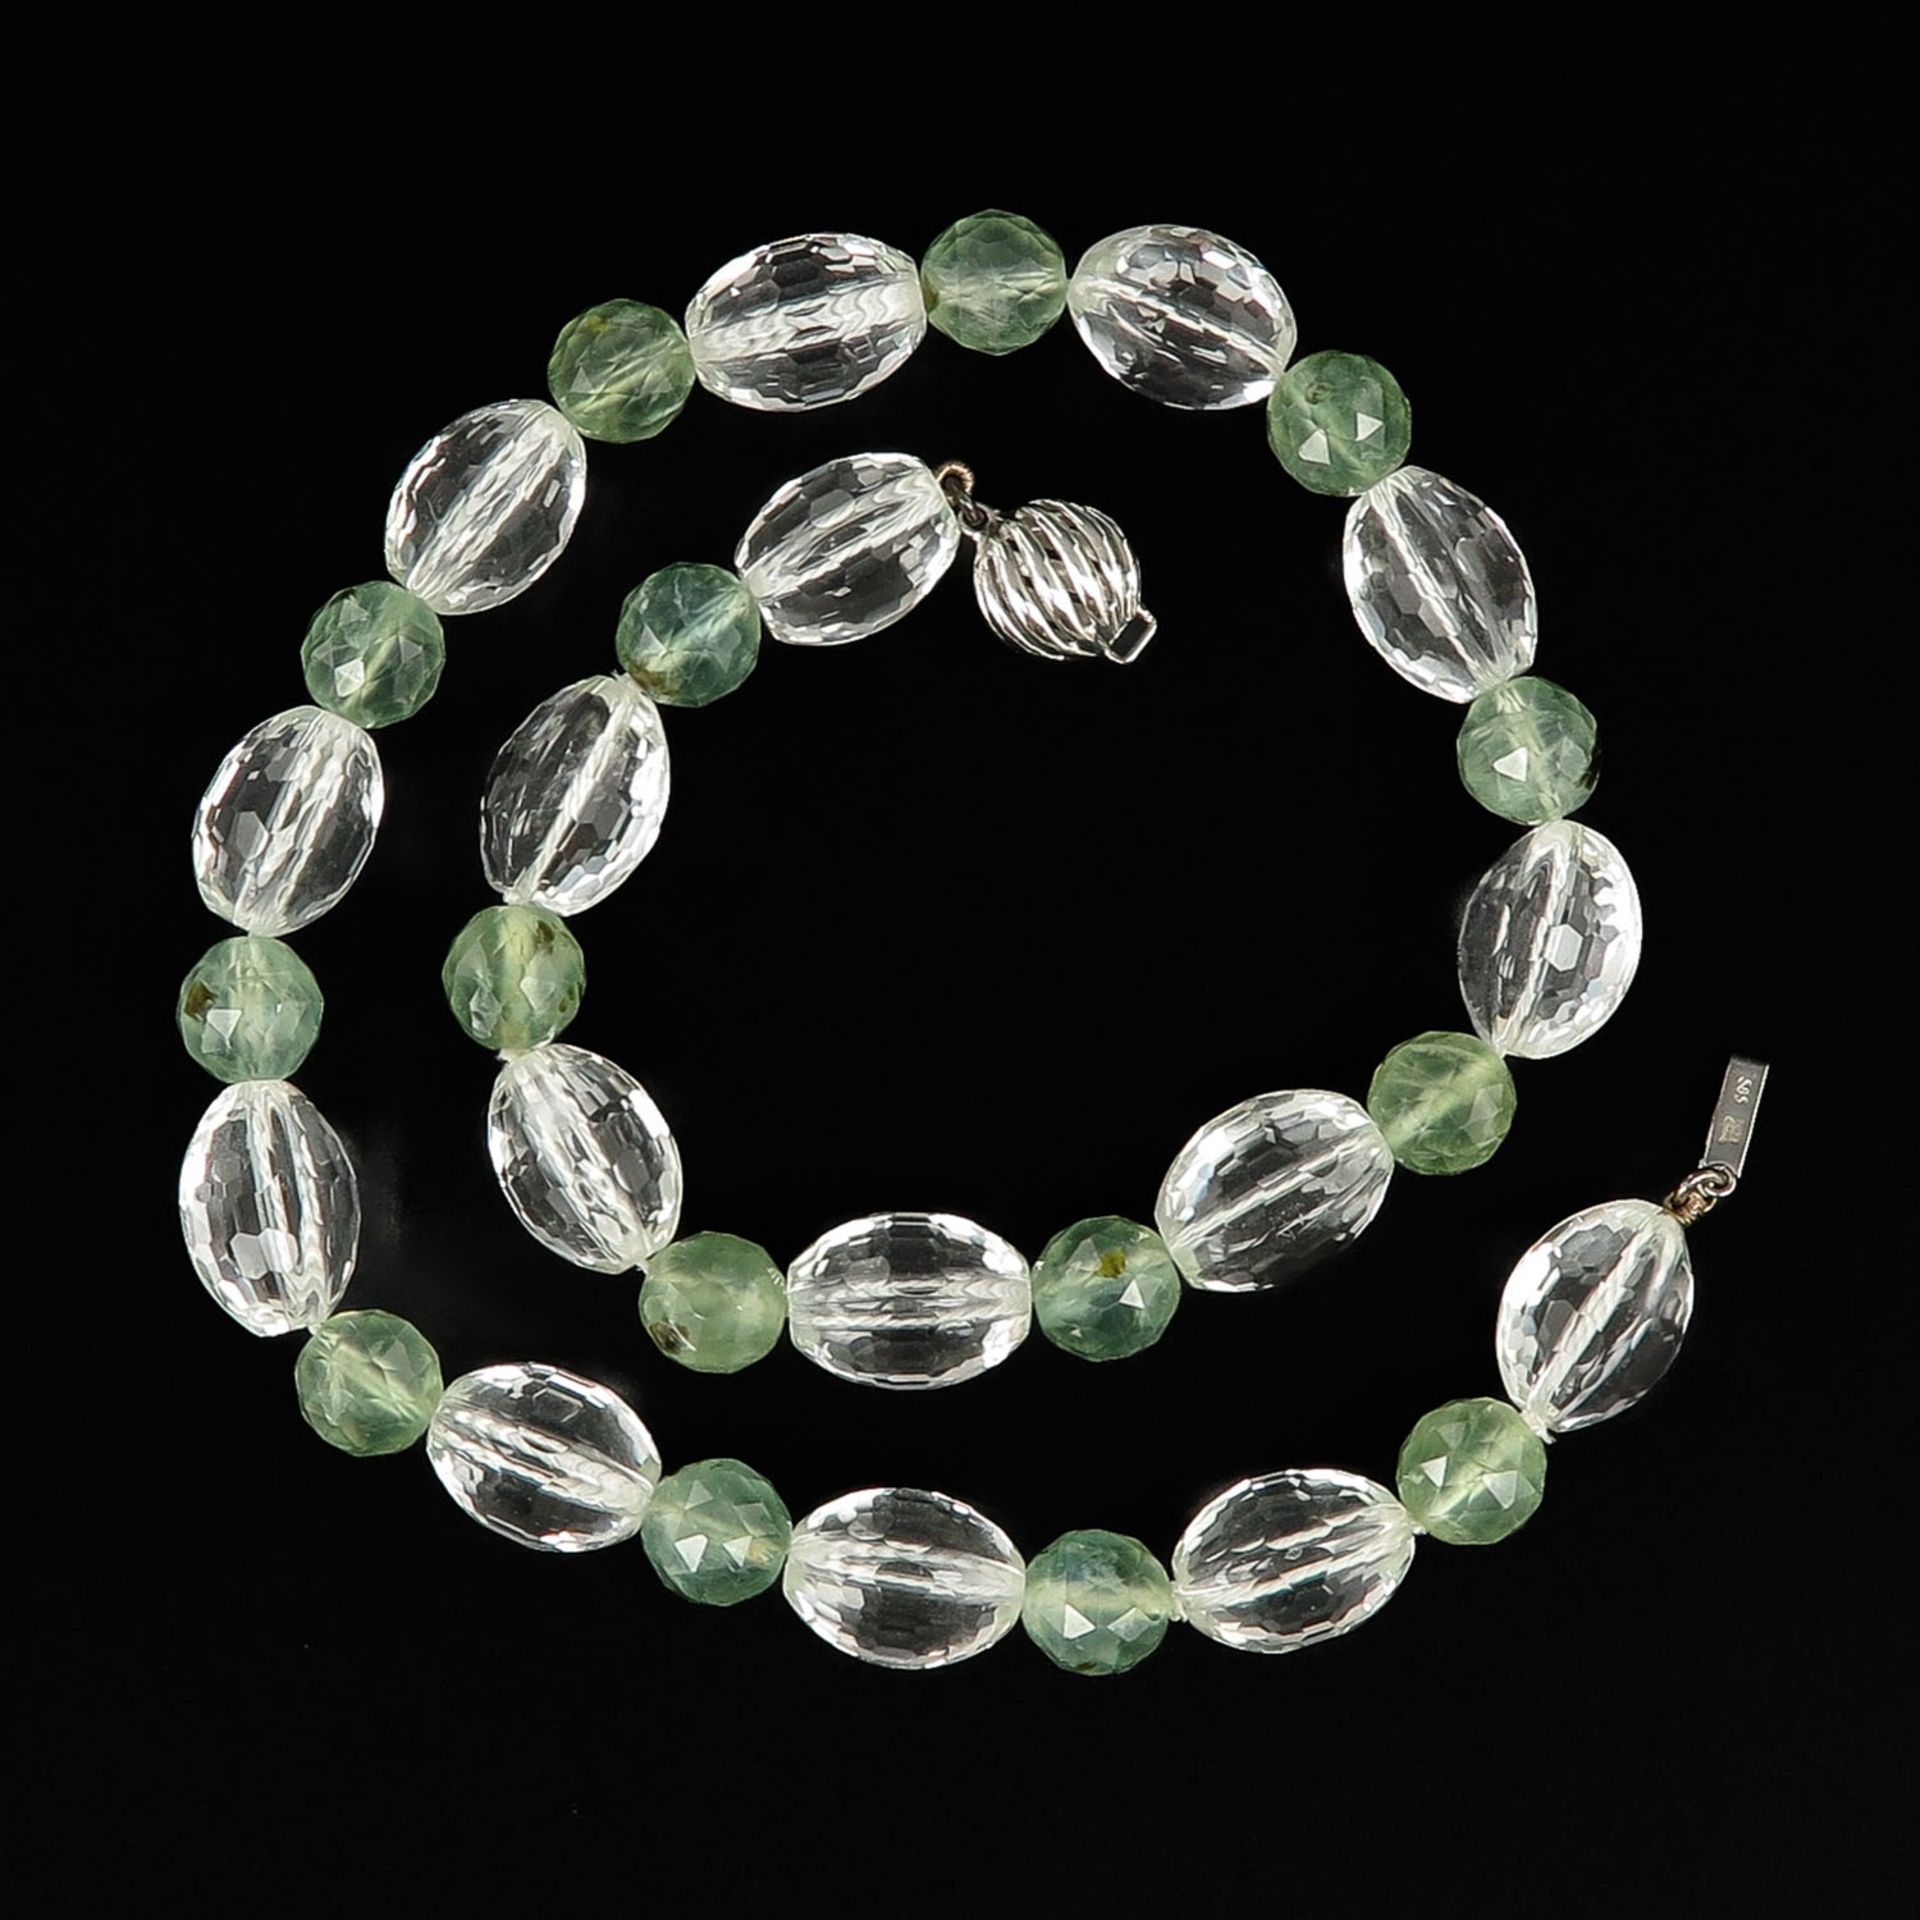 A Rock Crystal Necklace with 14KG Clasp - Image 2 of 6